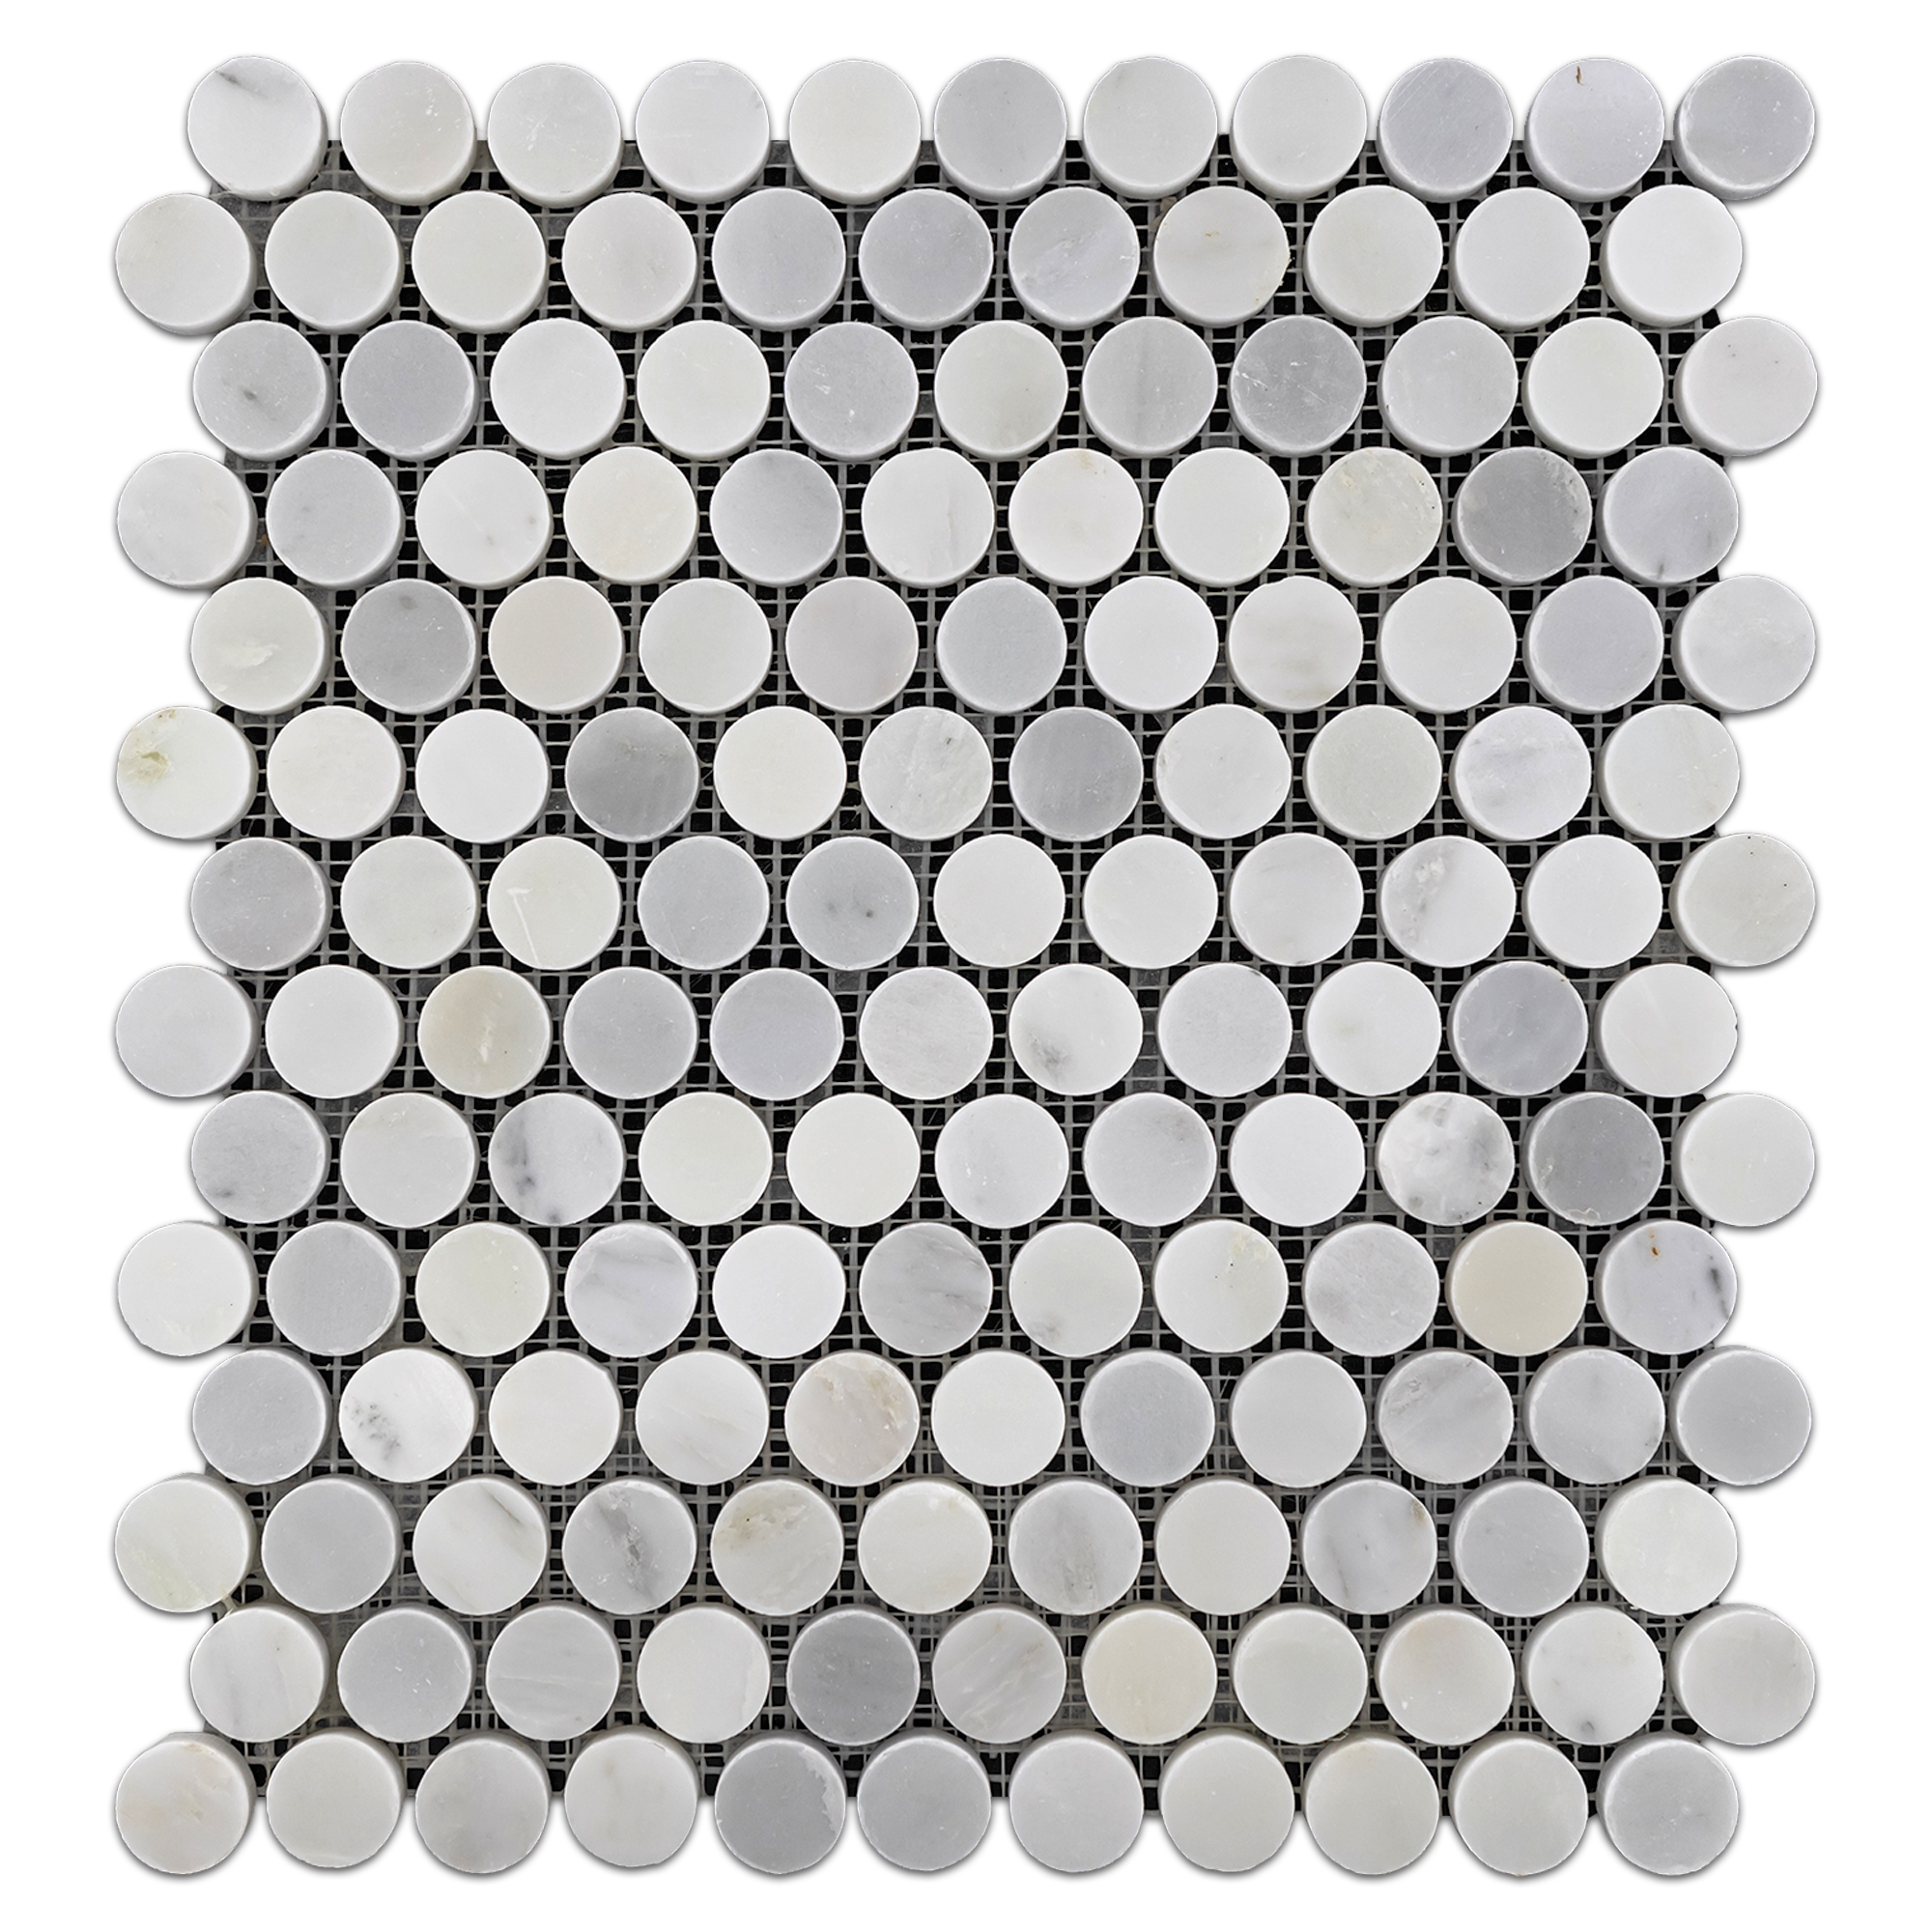 Elon Pearl White Marble 1 Penny Rounds Field Mosaic 11.5625x12.875x0.375 Polished SM1006P Surface Group International Product